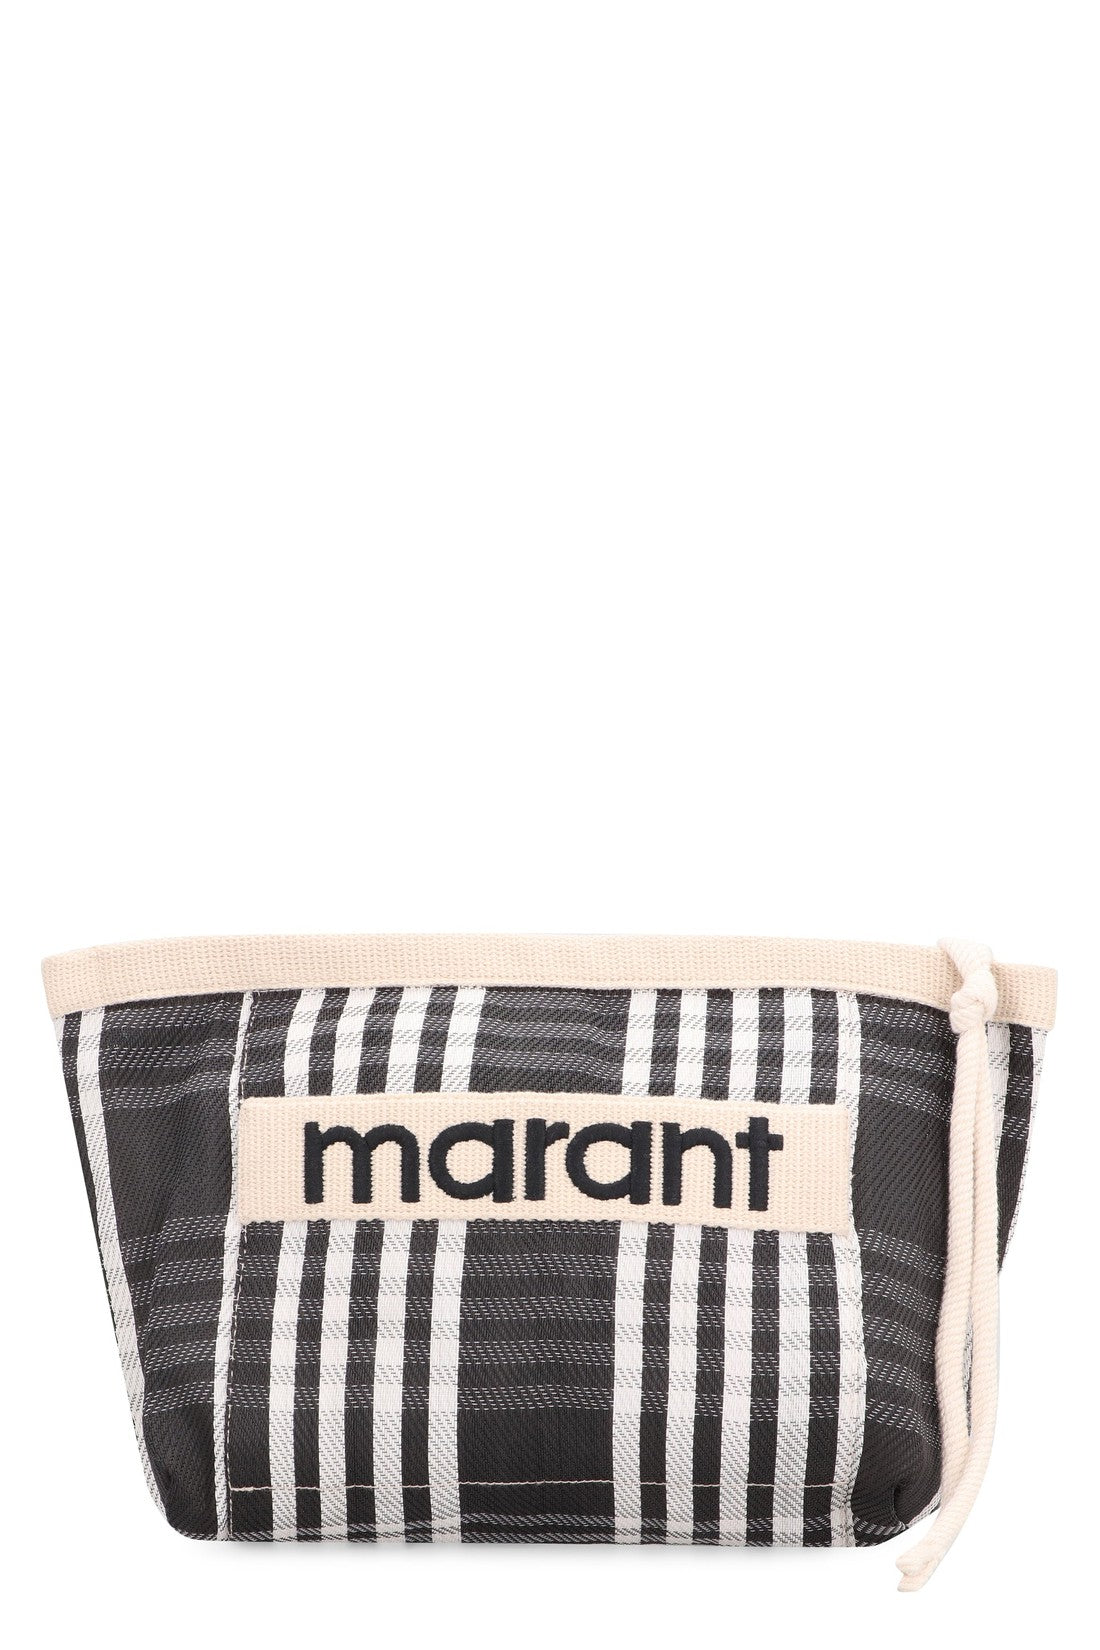 Isabel Marant-OUTLET-SALE-Powden clutch with logo-ARCHIVIST